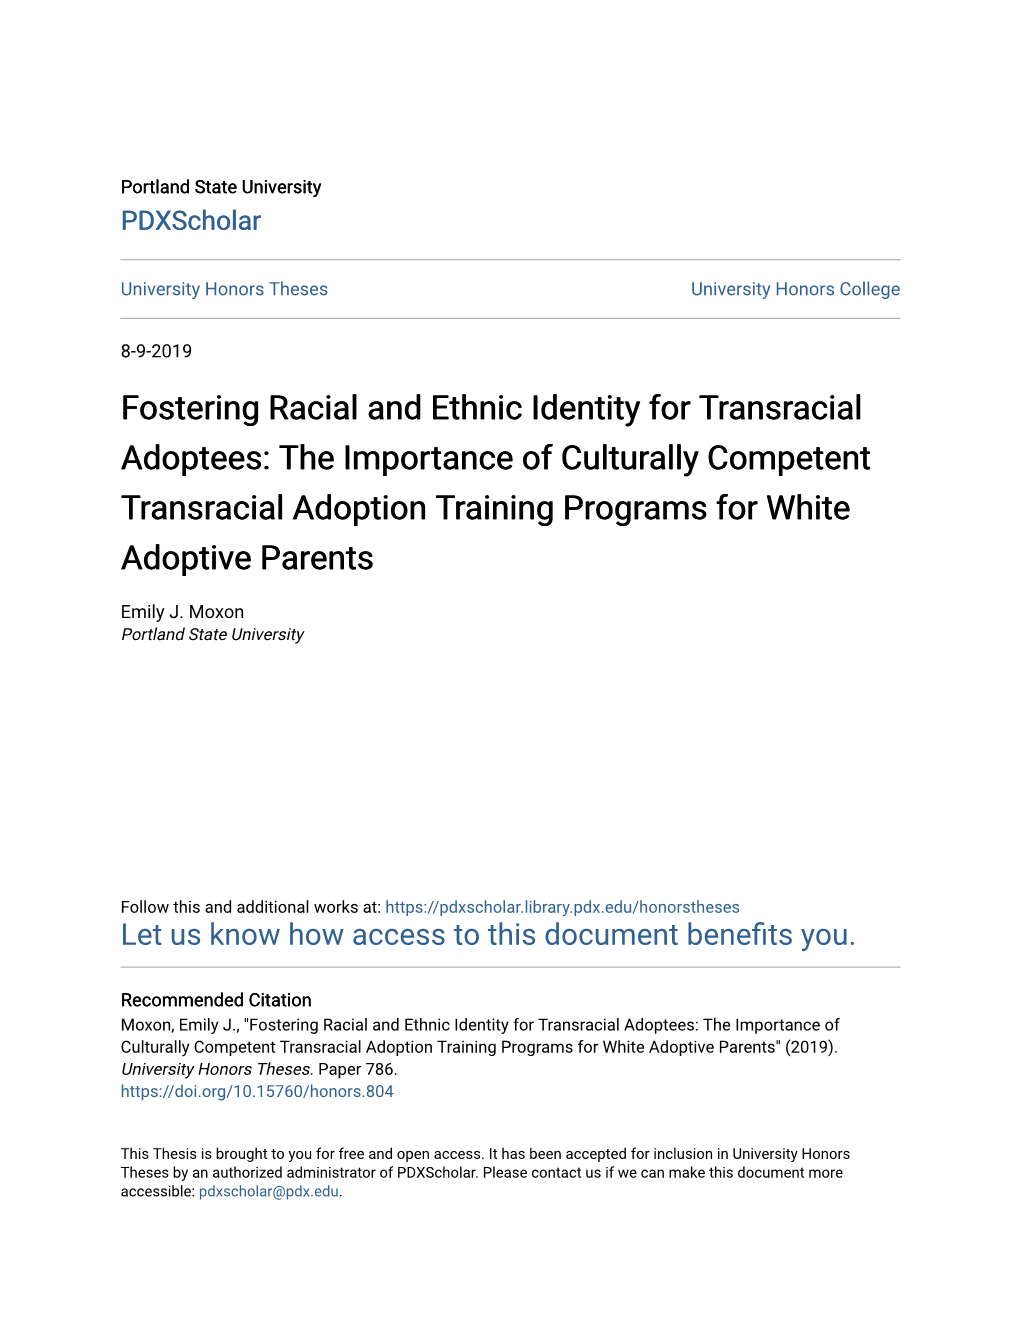 The Importance of Culturally Competent Transracial Adoption Training Programs for White Adoptive Parents